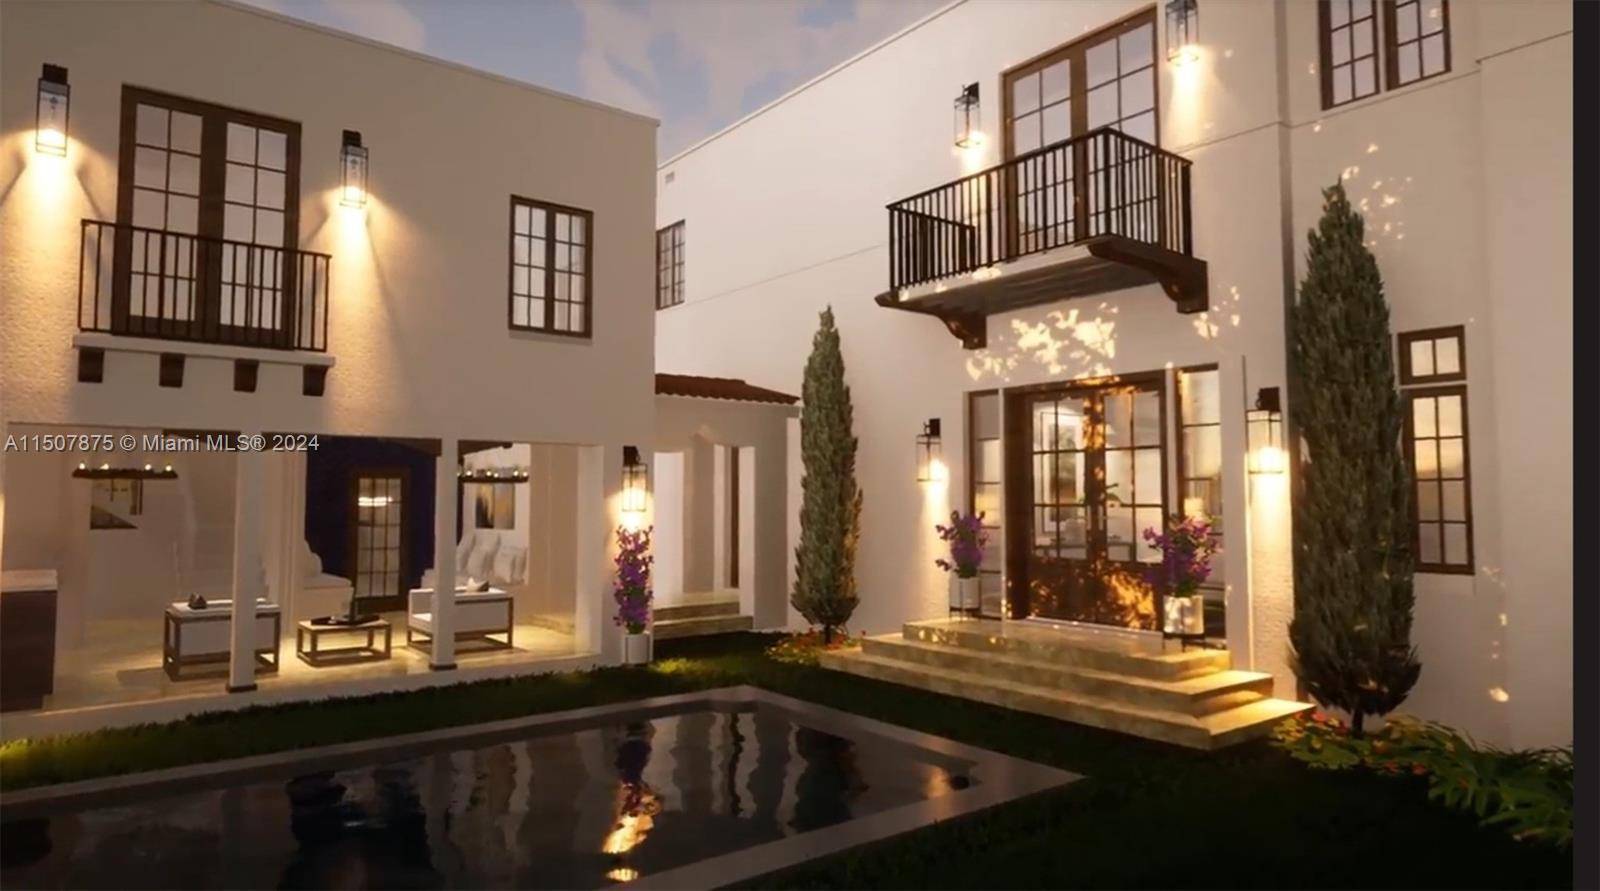 This stunning 4BR, 4BA, 2 half bath new construction Spanish historical home isn t merely defined by the exterior, global influence and tranquil spaces but rather by the countless layers ...